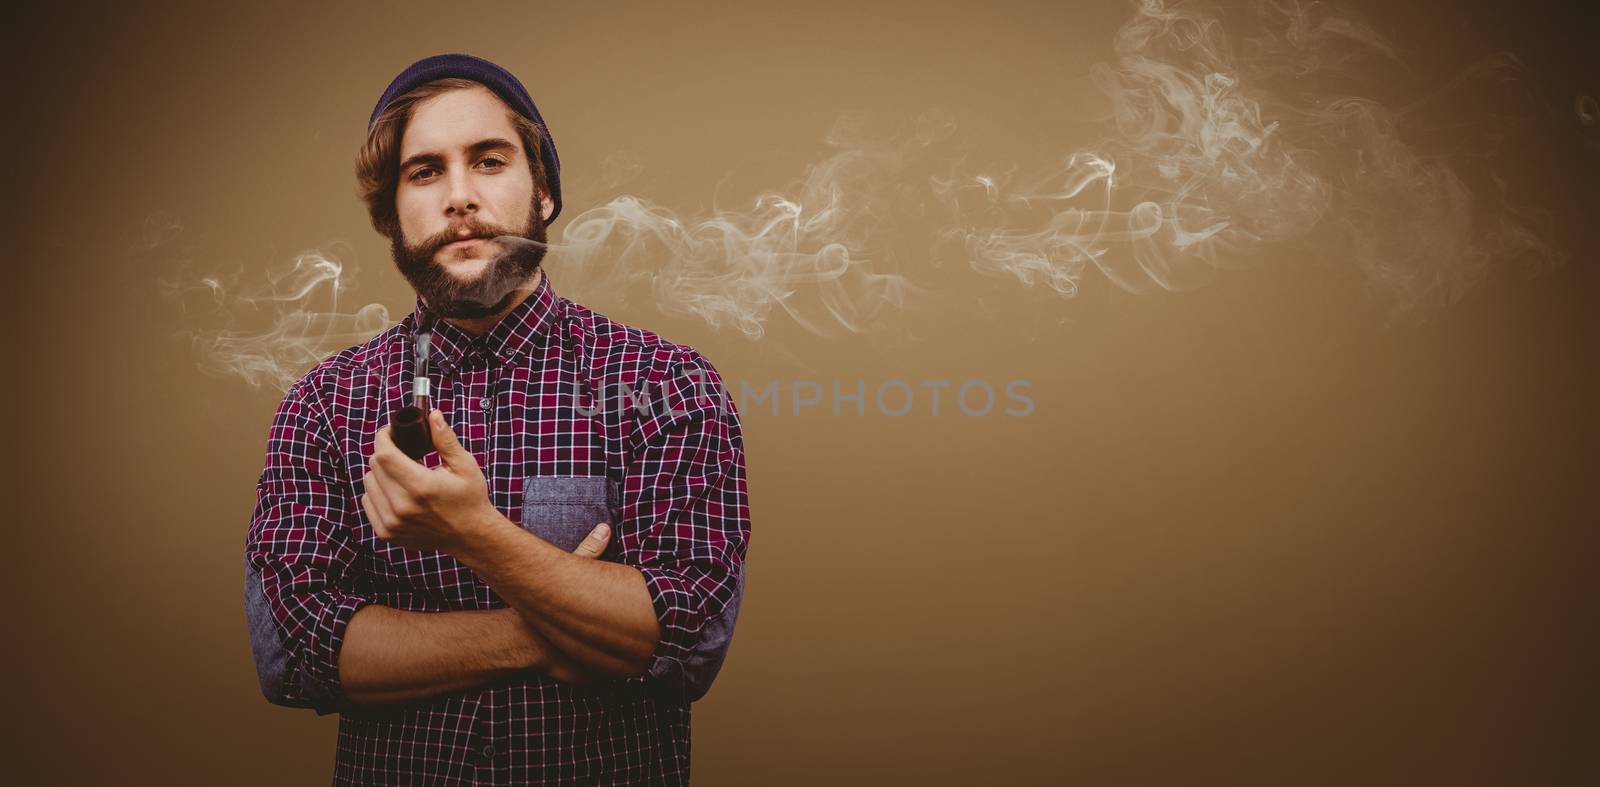 Portrait of confident hipster holding smoking pipe against grey background with vignette